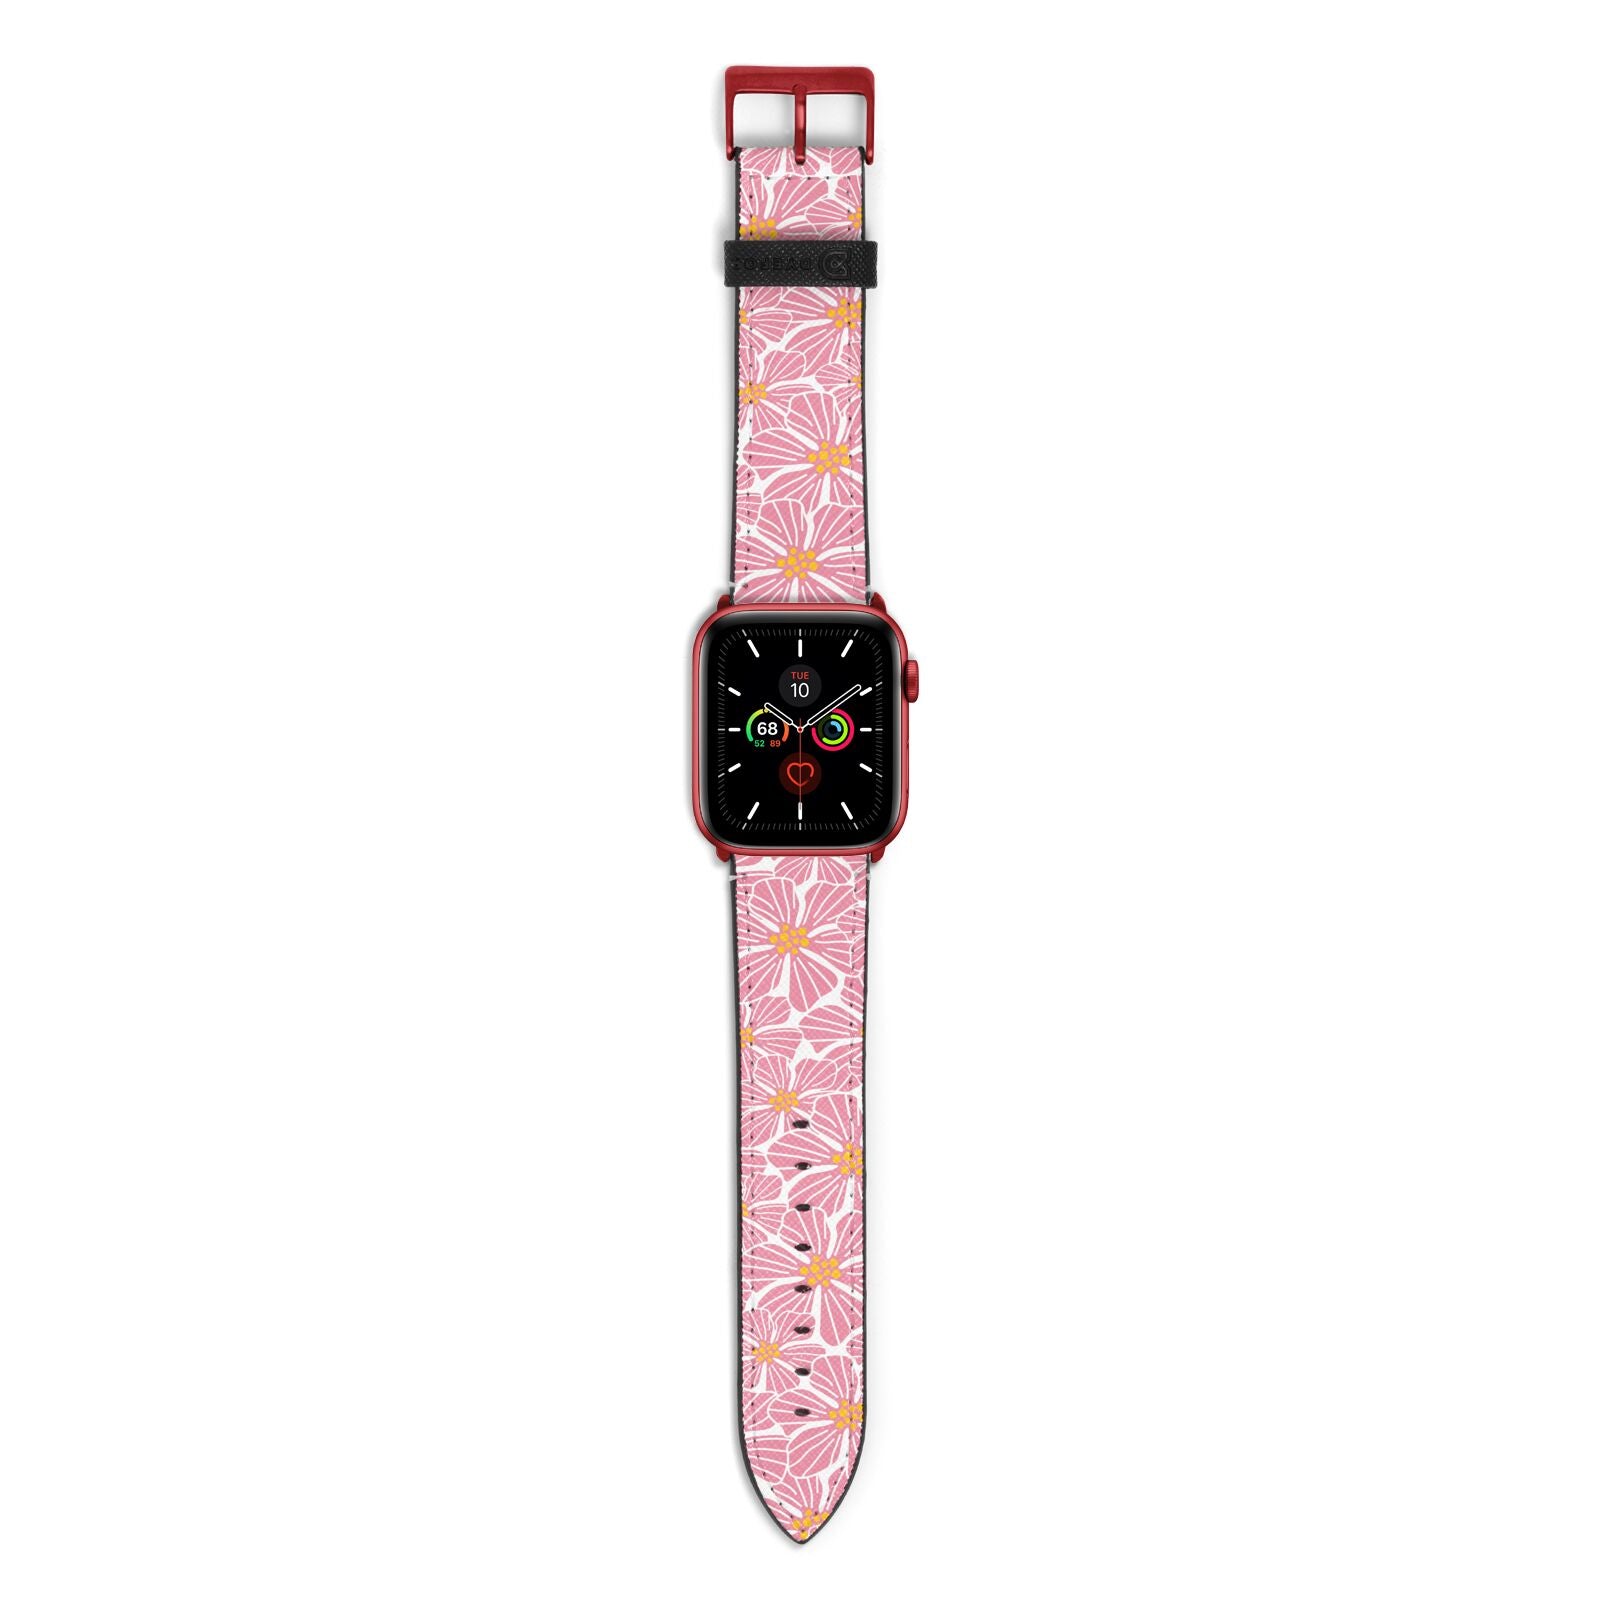 Pink Flowers Apple Watch Strap with Red Hardware